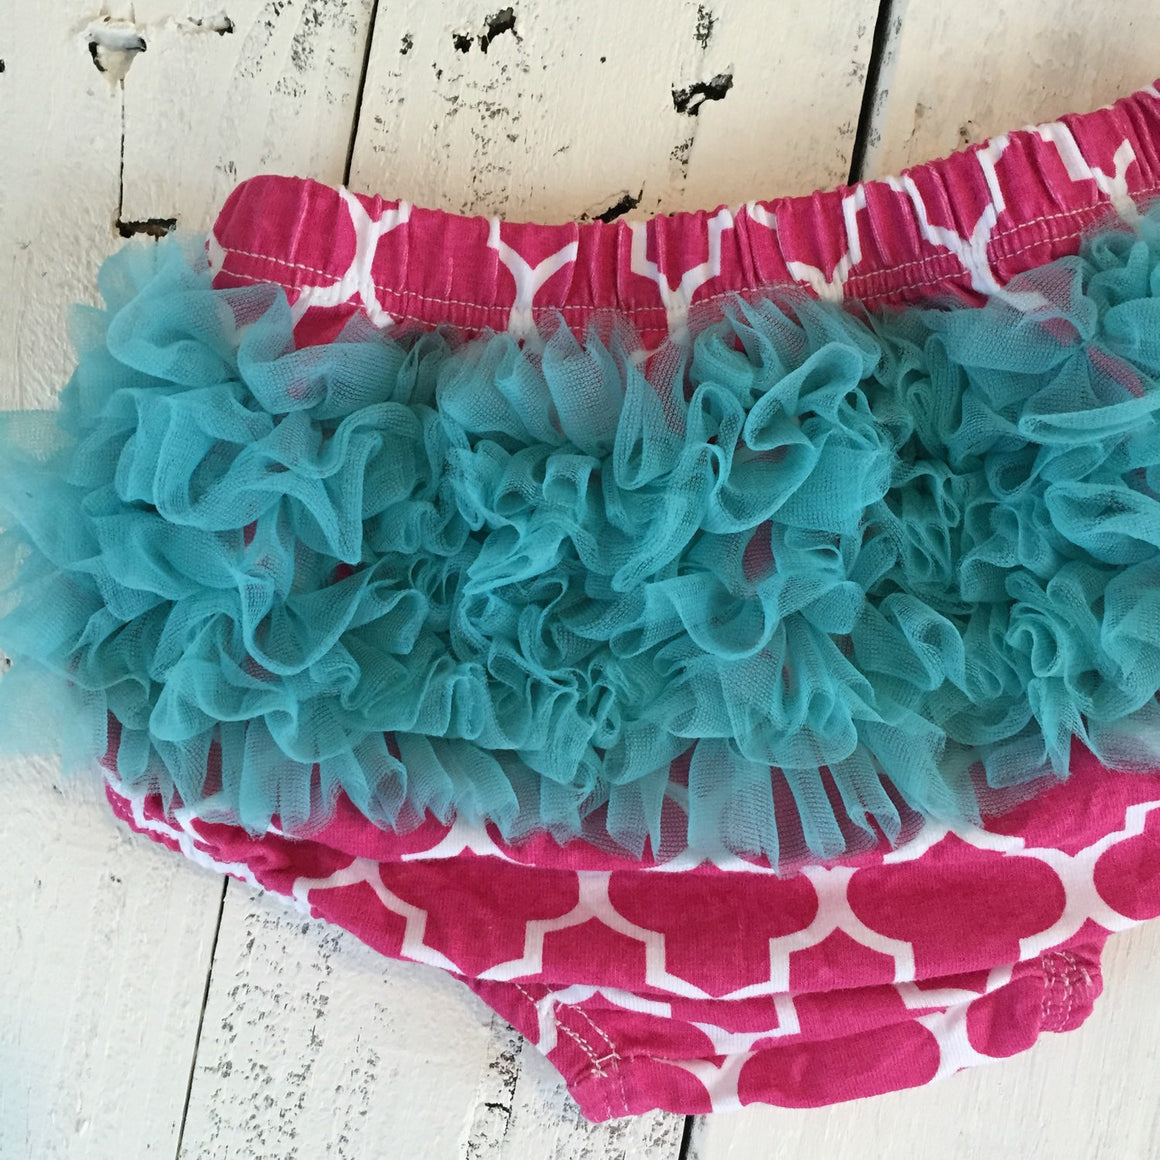 SALE! Bloomers  - Pink and White Quatrefoil with Teal Blue Ruffles - HoneyLoveBoutique